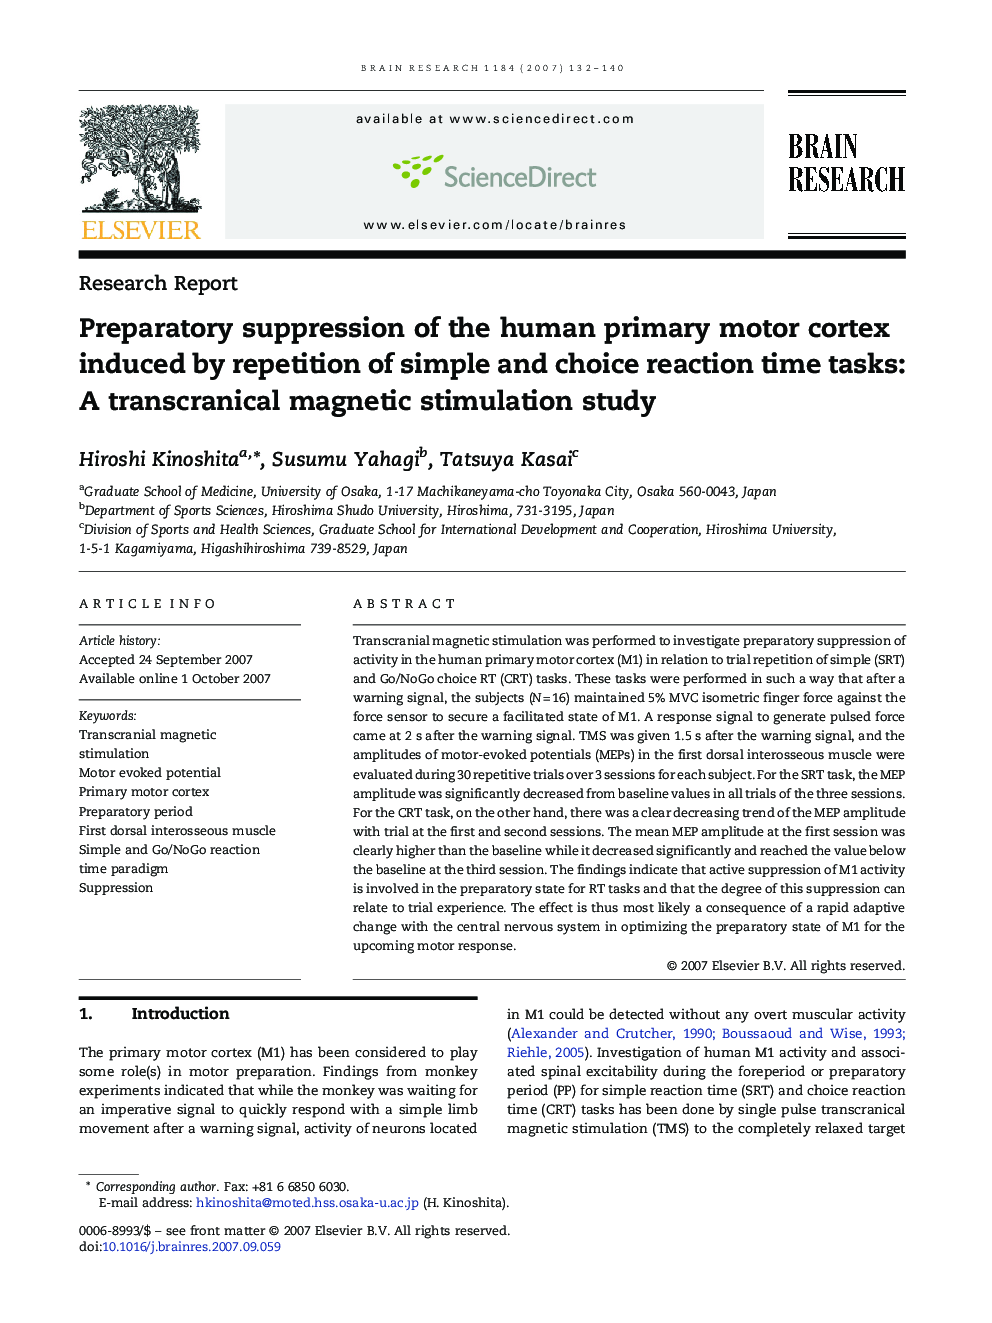 Preparatory suppression of the human primary motor cortex induced by repetition of simple and choice reaction time tasks: A transcranical magnetic stimulation study